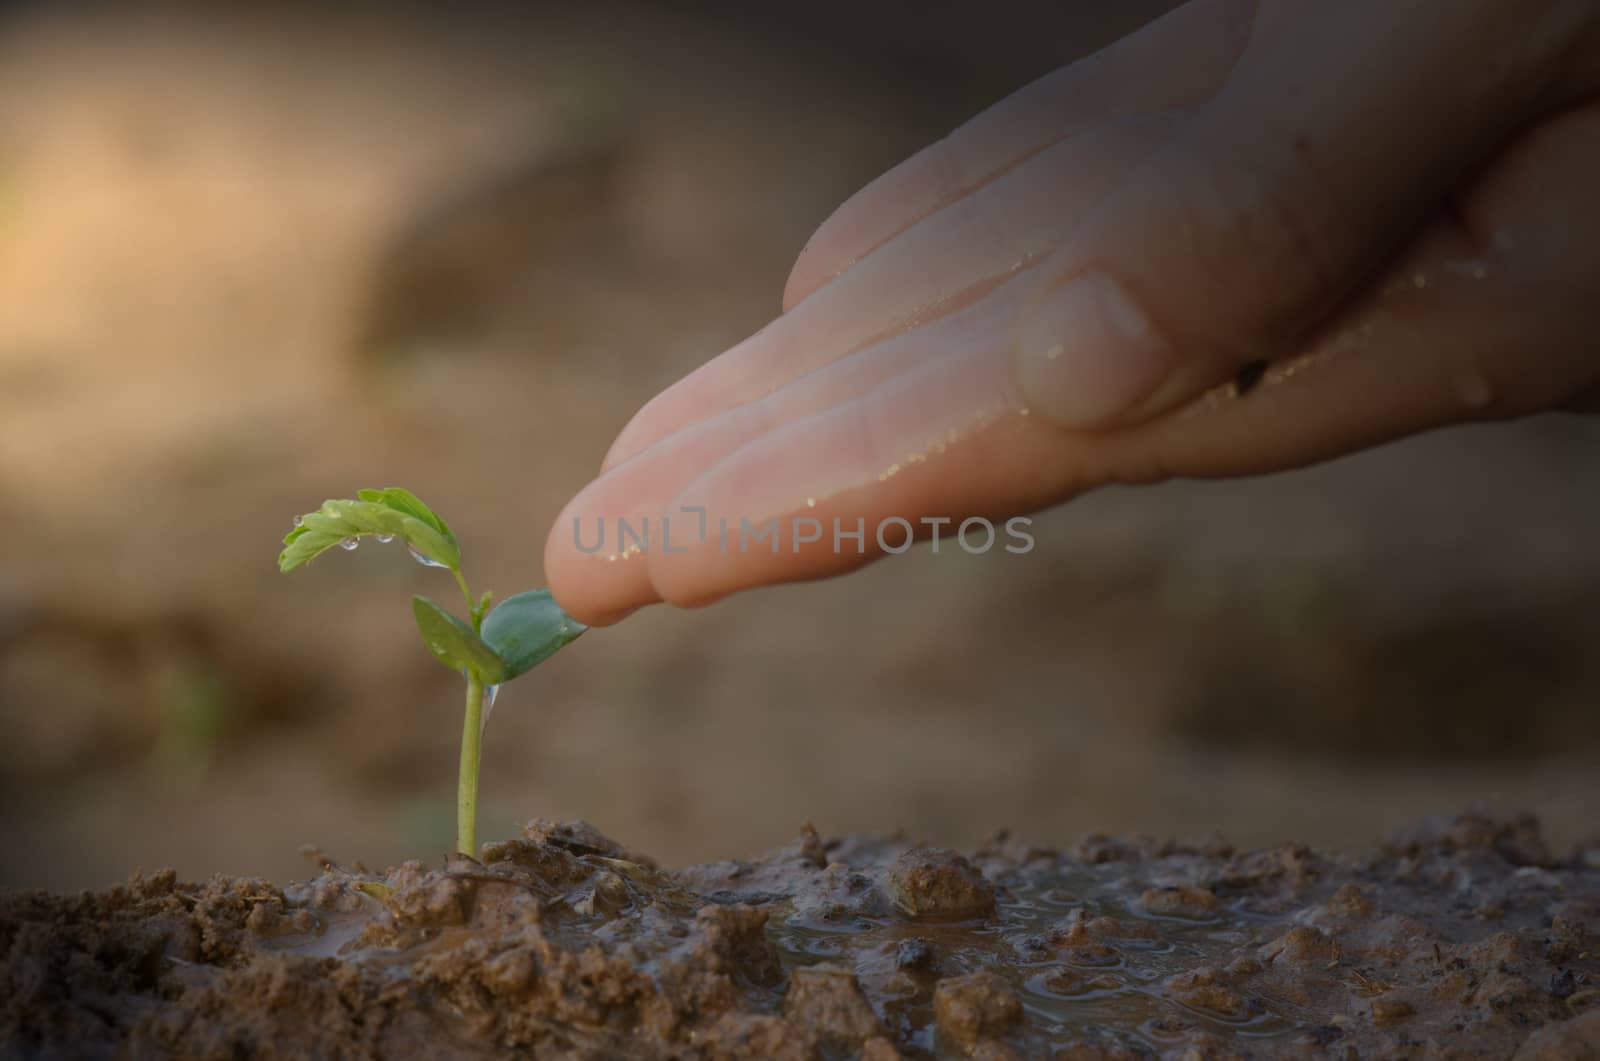 The concept of environmental conservation. Small seedlings that are just planted and waiting for growth, with hands that are dripping water. Show conservation of trees and the environment.